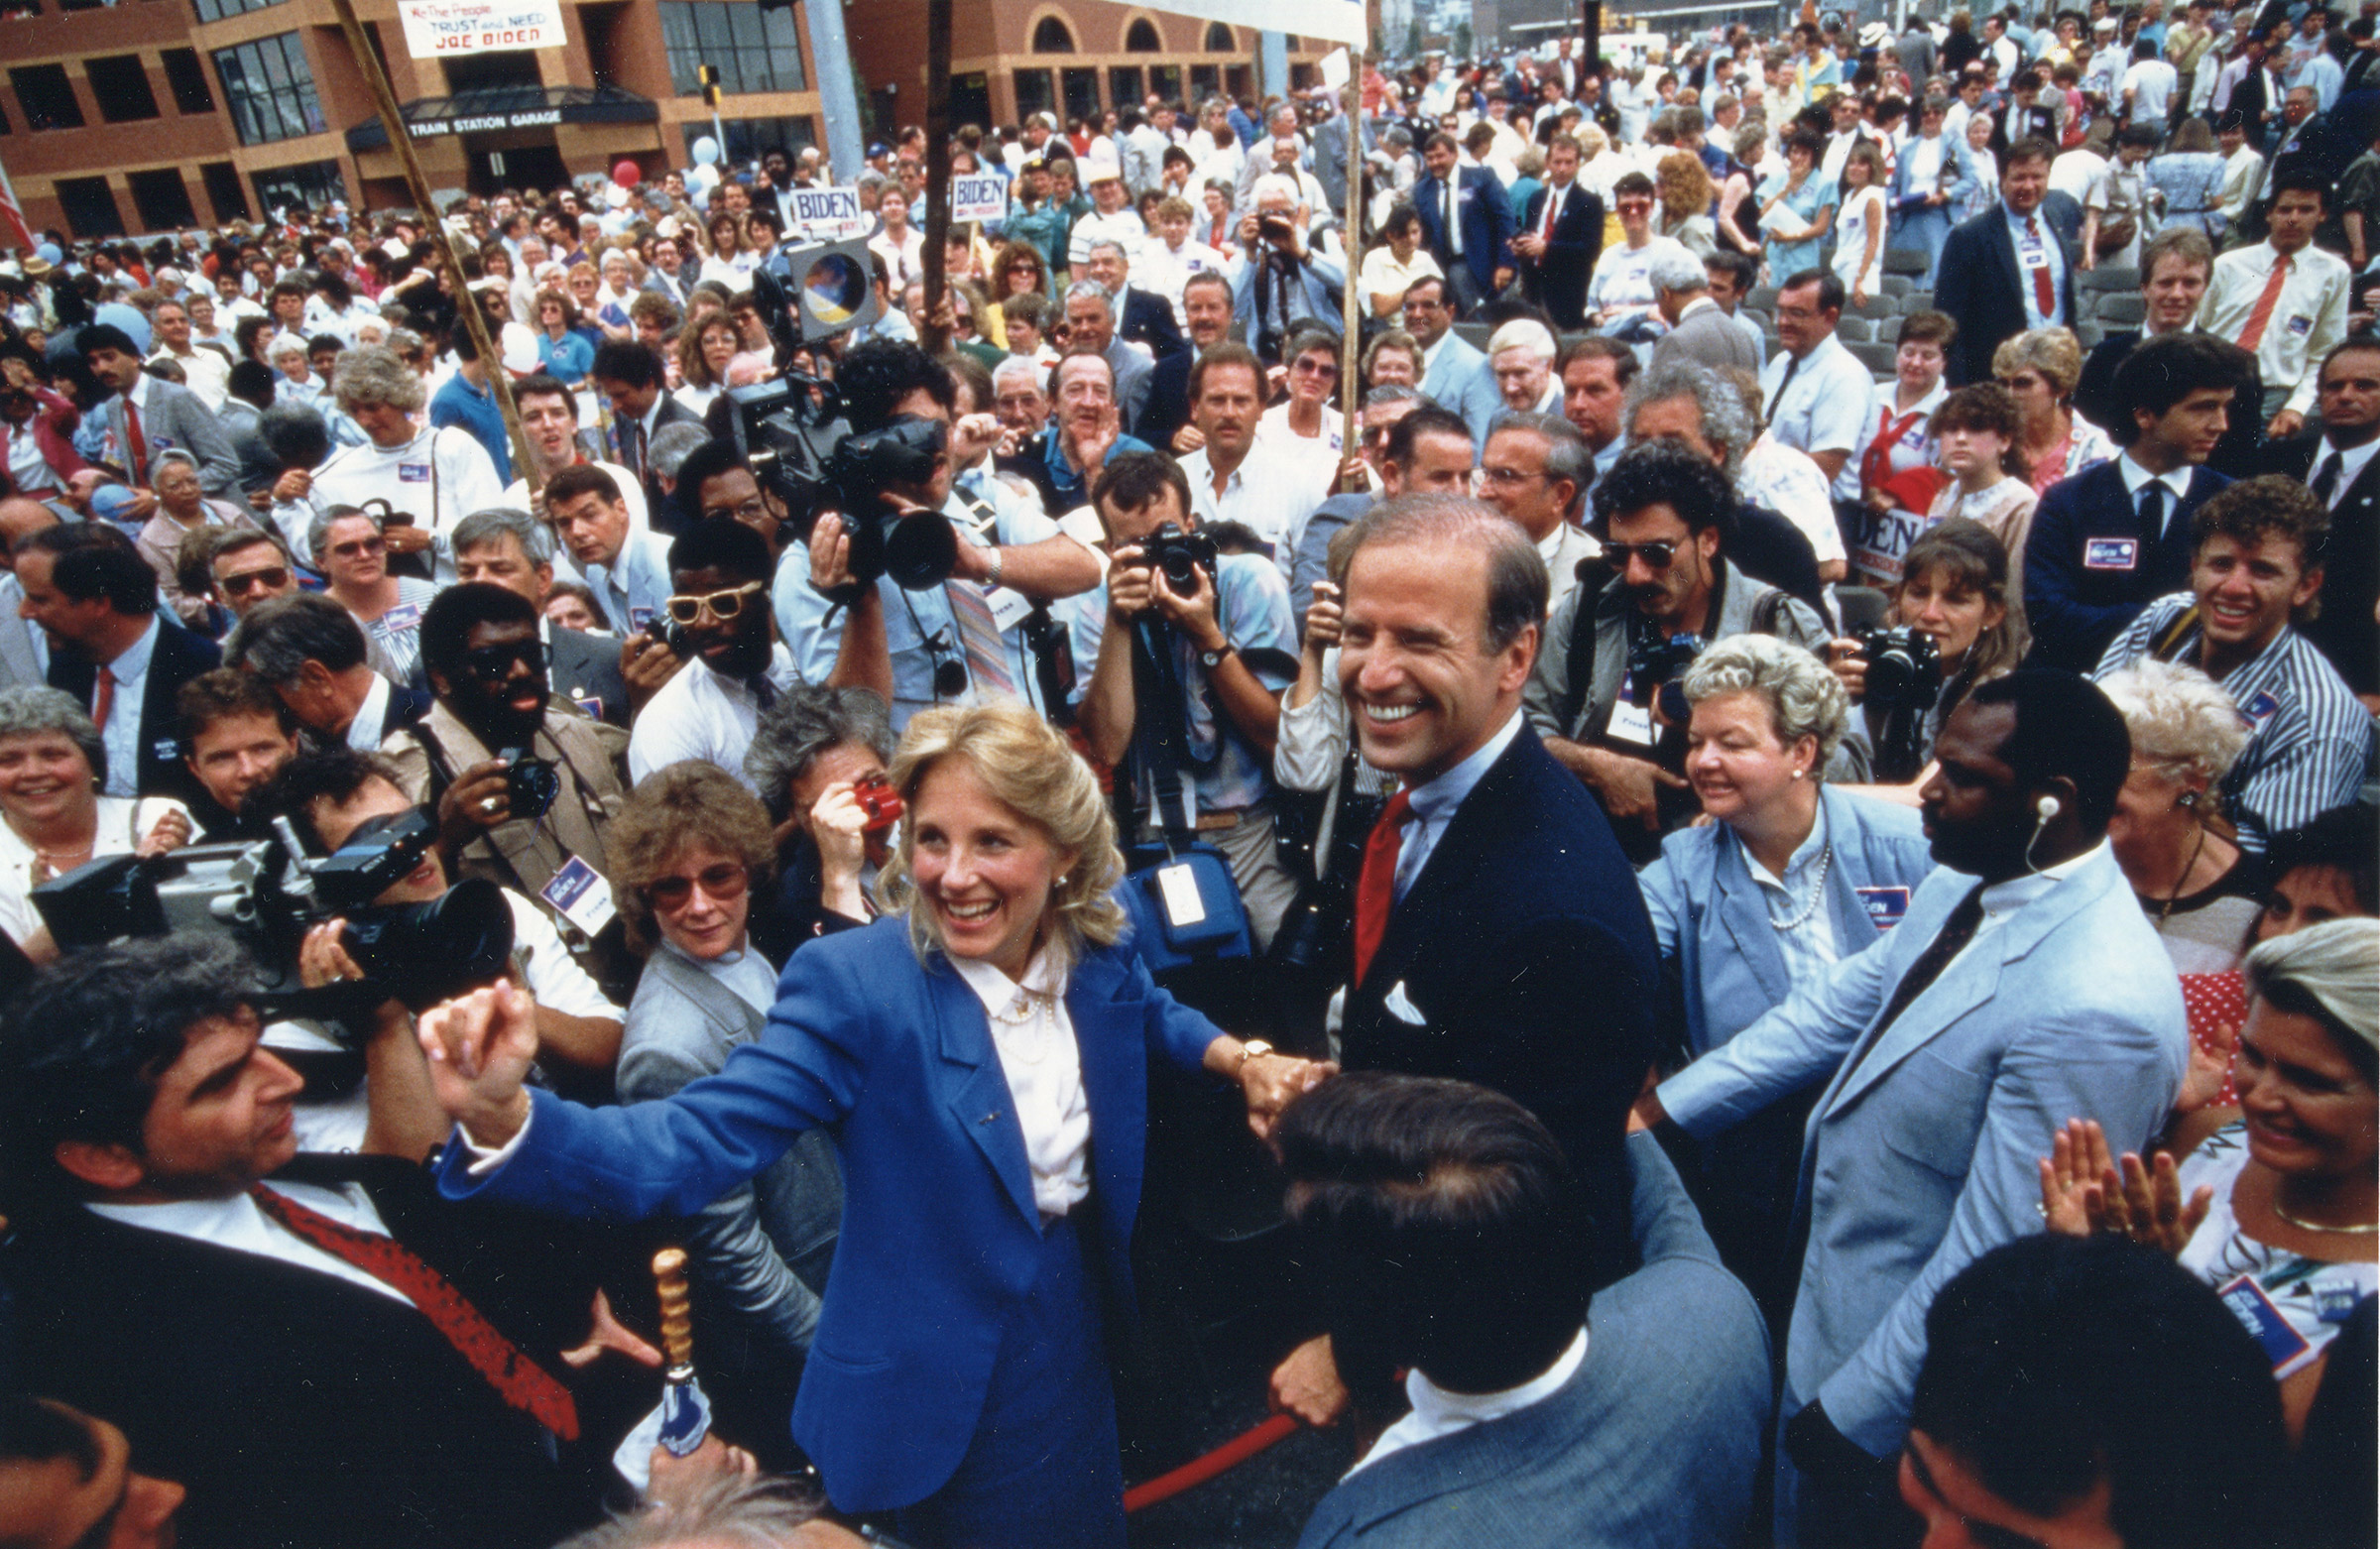 Biden’s first presidential campaign ends before any votes are cast, amid a plagiarism scandal in 1987 (Getty Images)